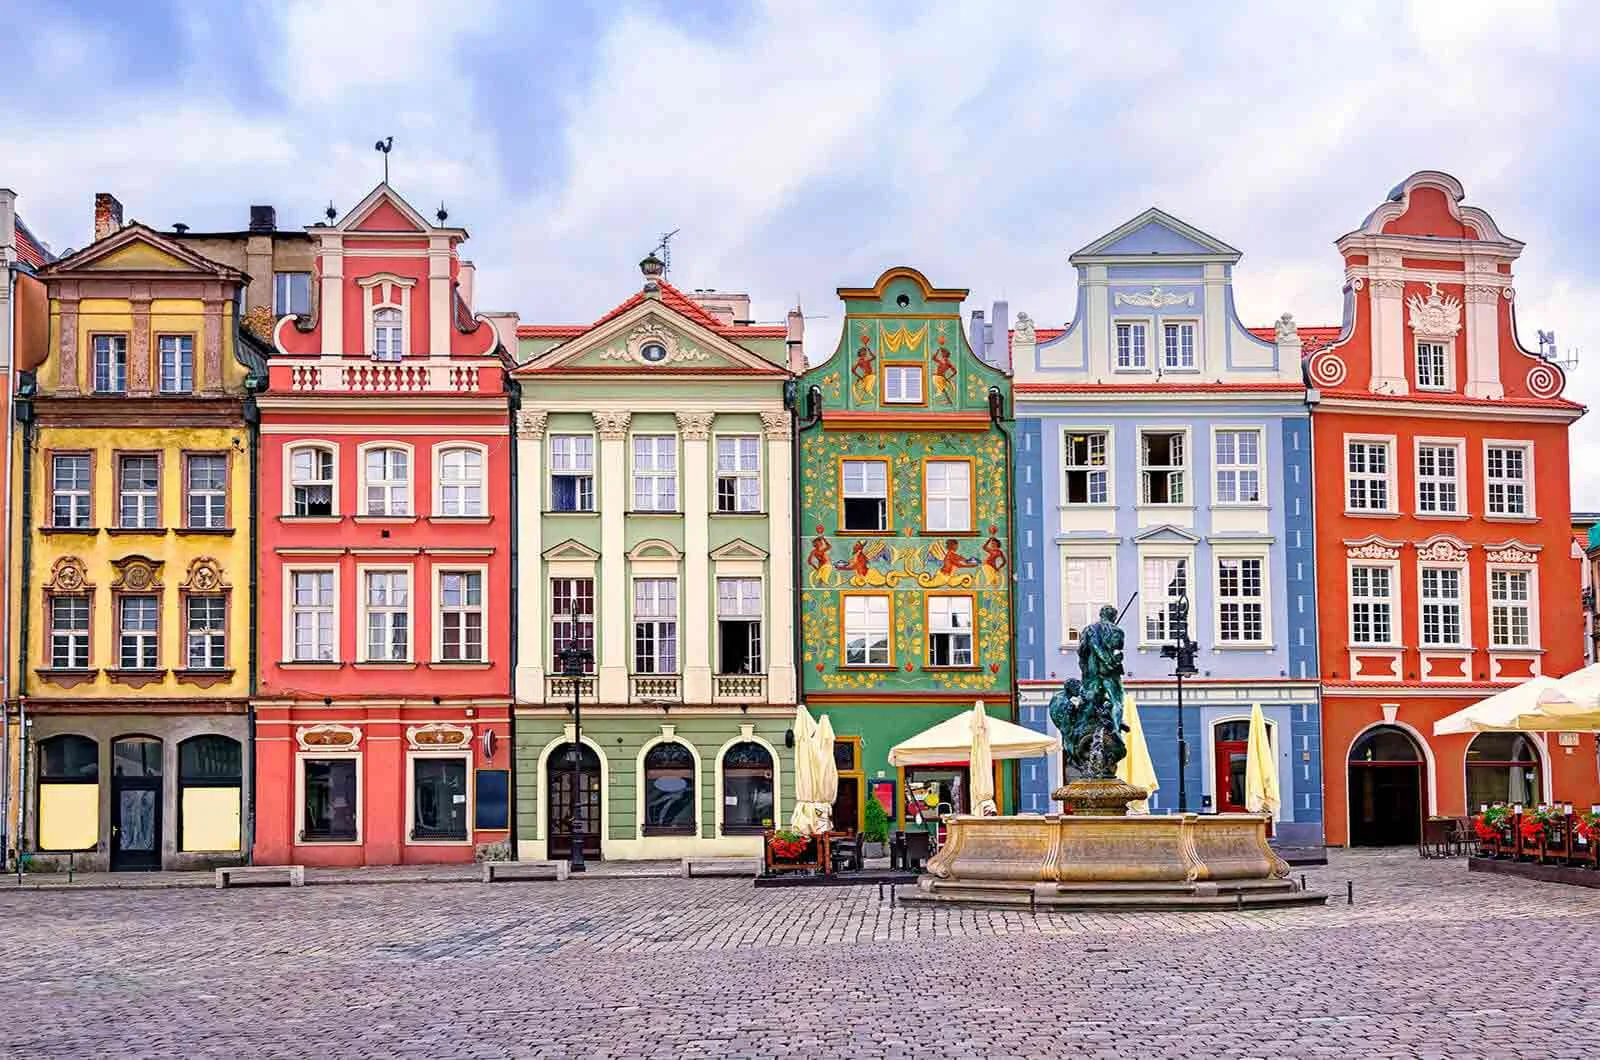 Renaissance coloured facades in a central square and a fountain in Poland. Concept of English into Polish translation.